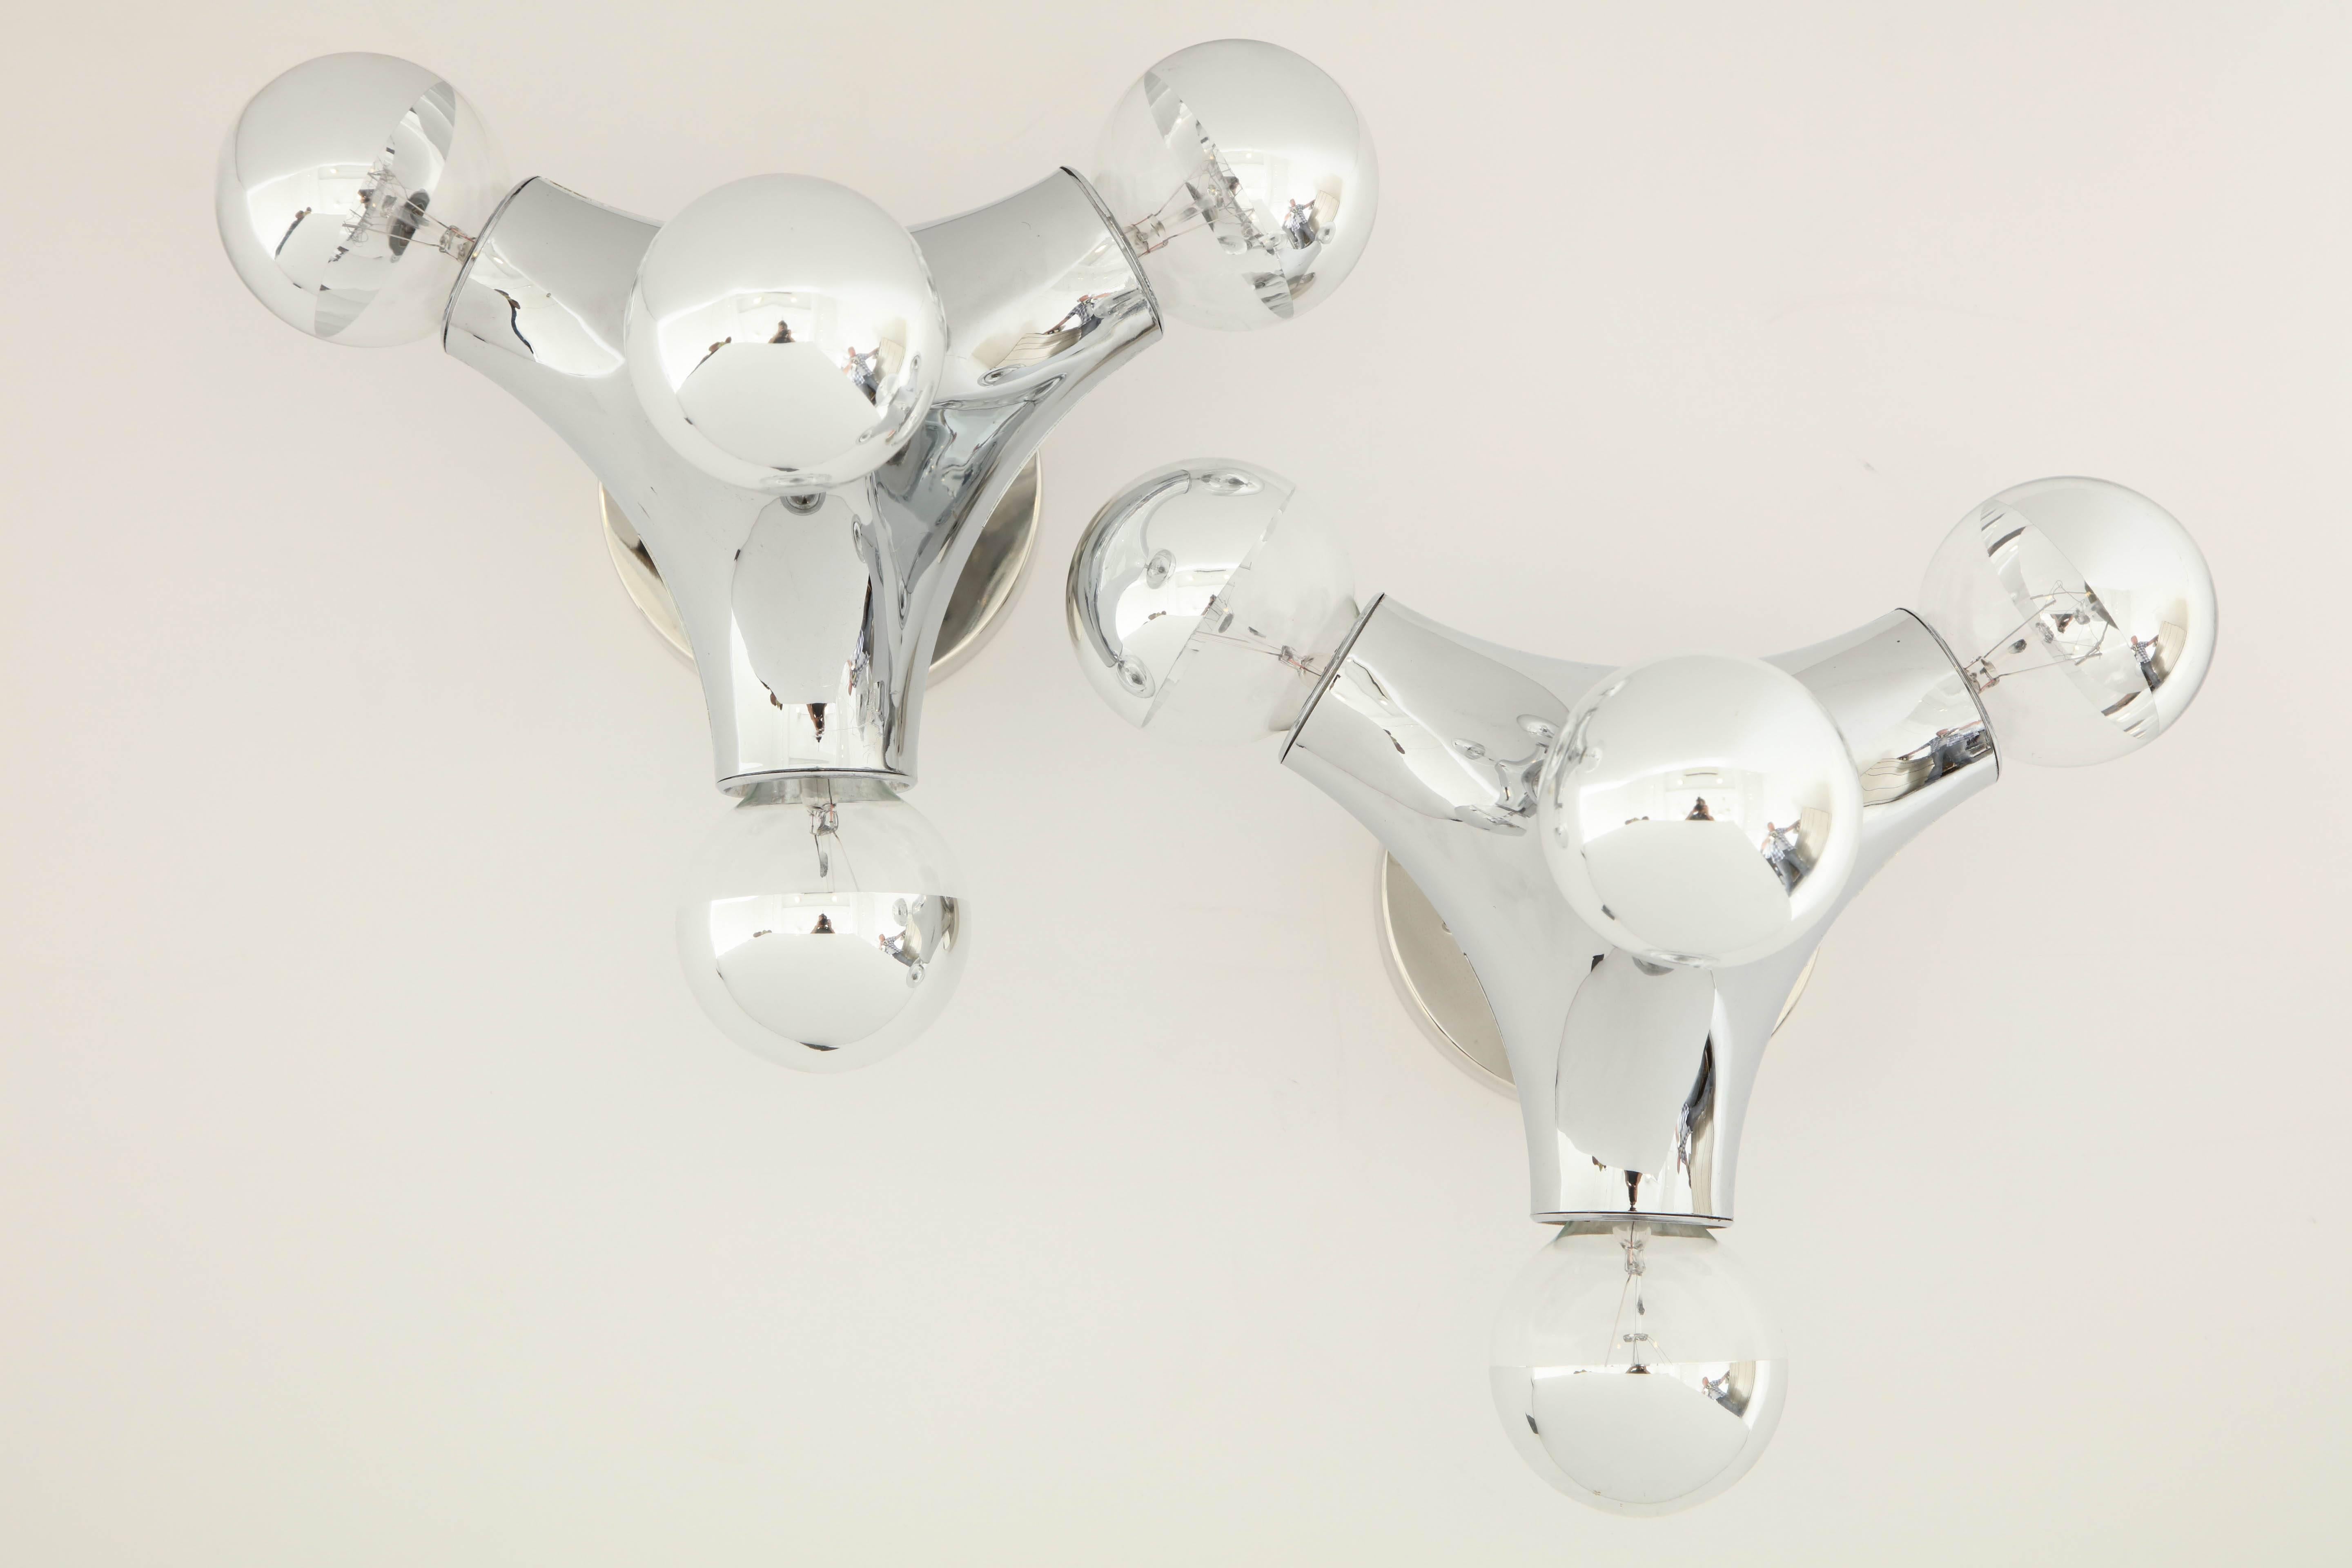 Pair of 1960s German Spage Age wall or ceiling lights by Cosack
High polished PVC fixture has four-light sources that have been newly rewired for the US and the fixtures come complete with chrome capped bulbs.